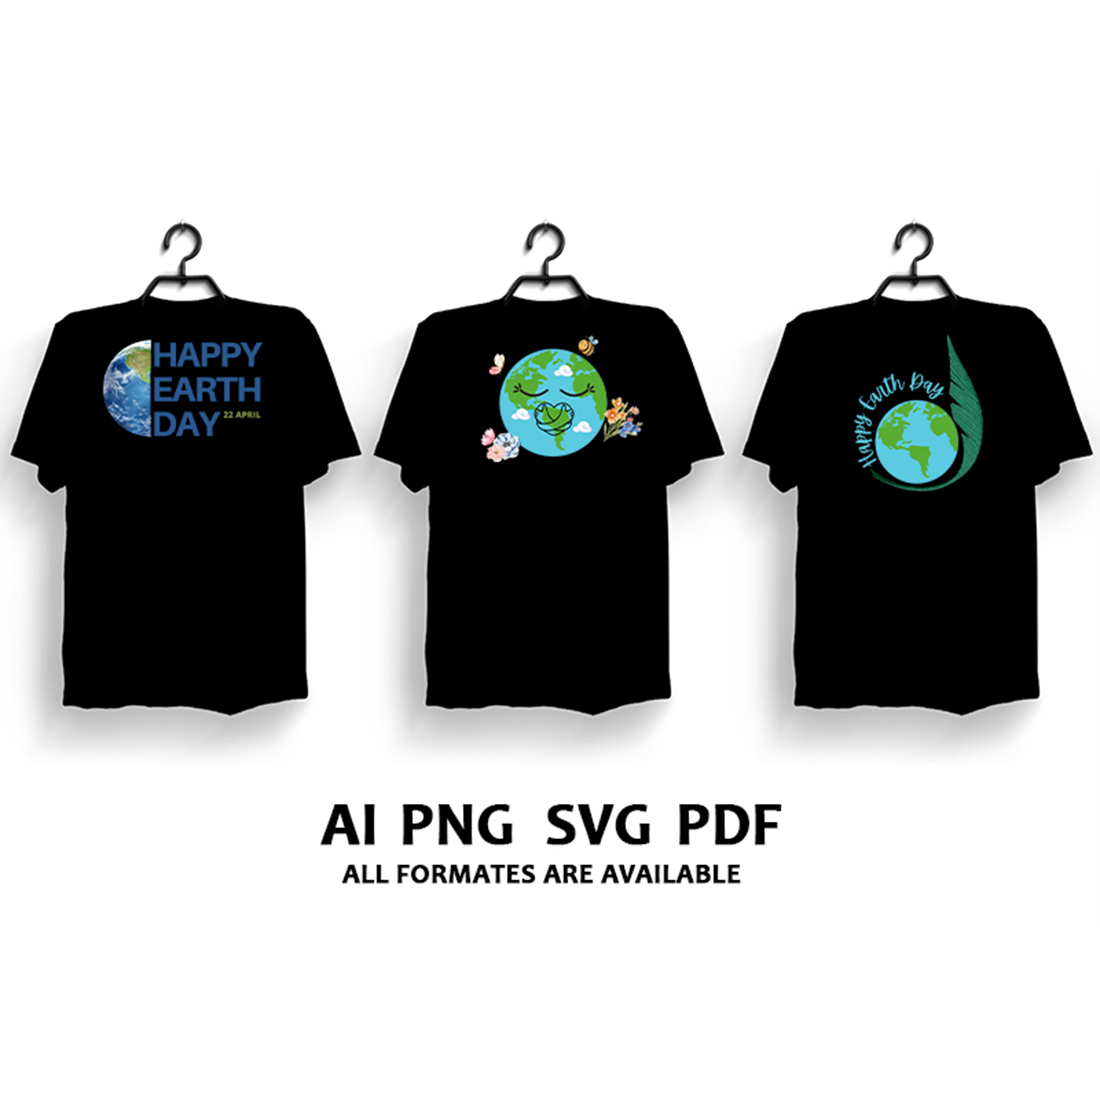 A pack of images of t-shirts with wonderful prints on the theme of Earth Day